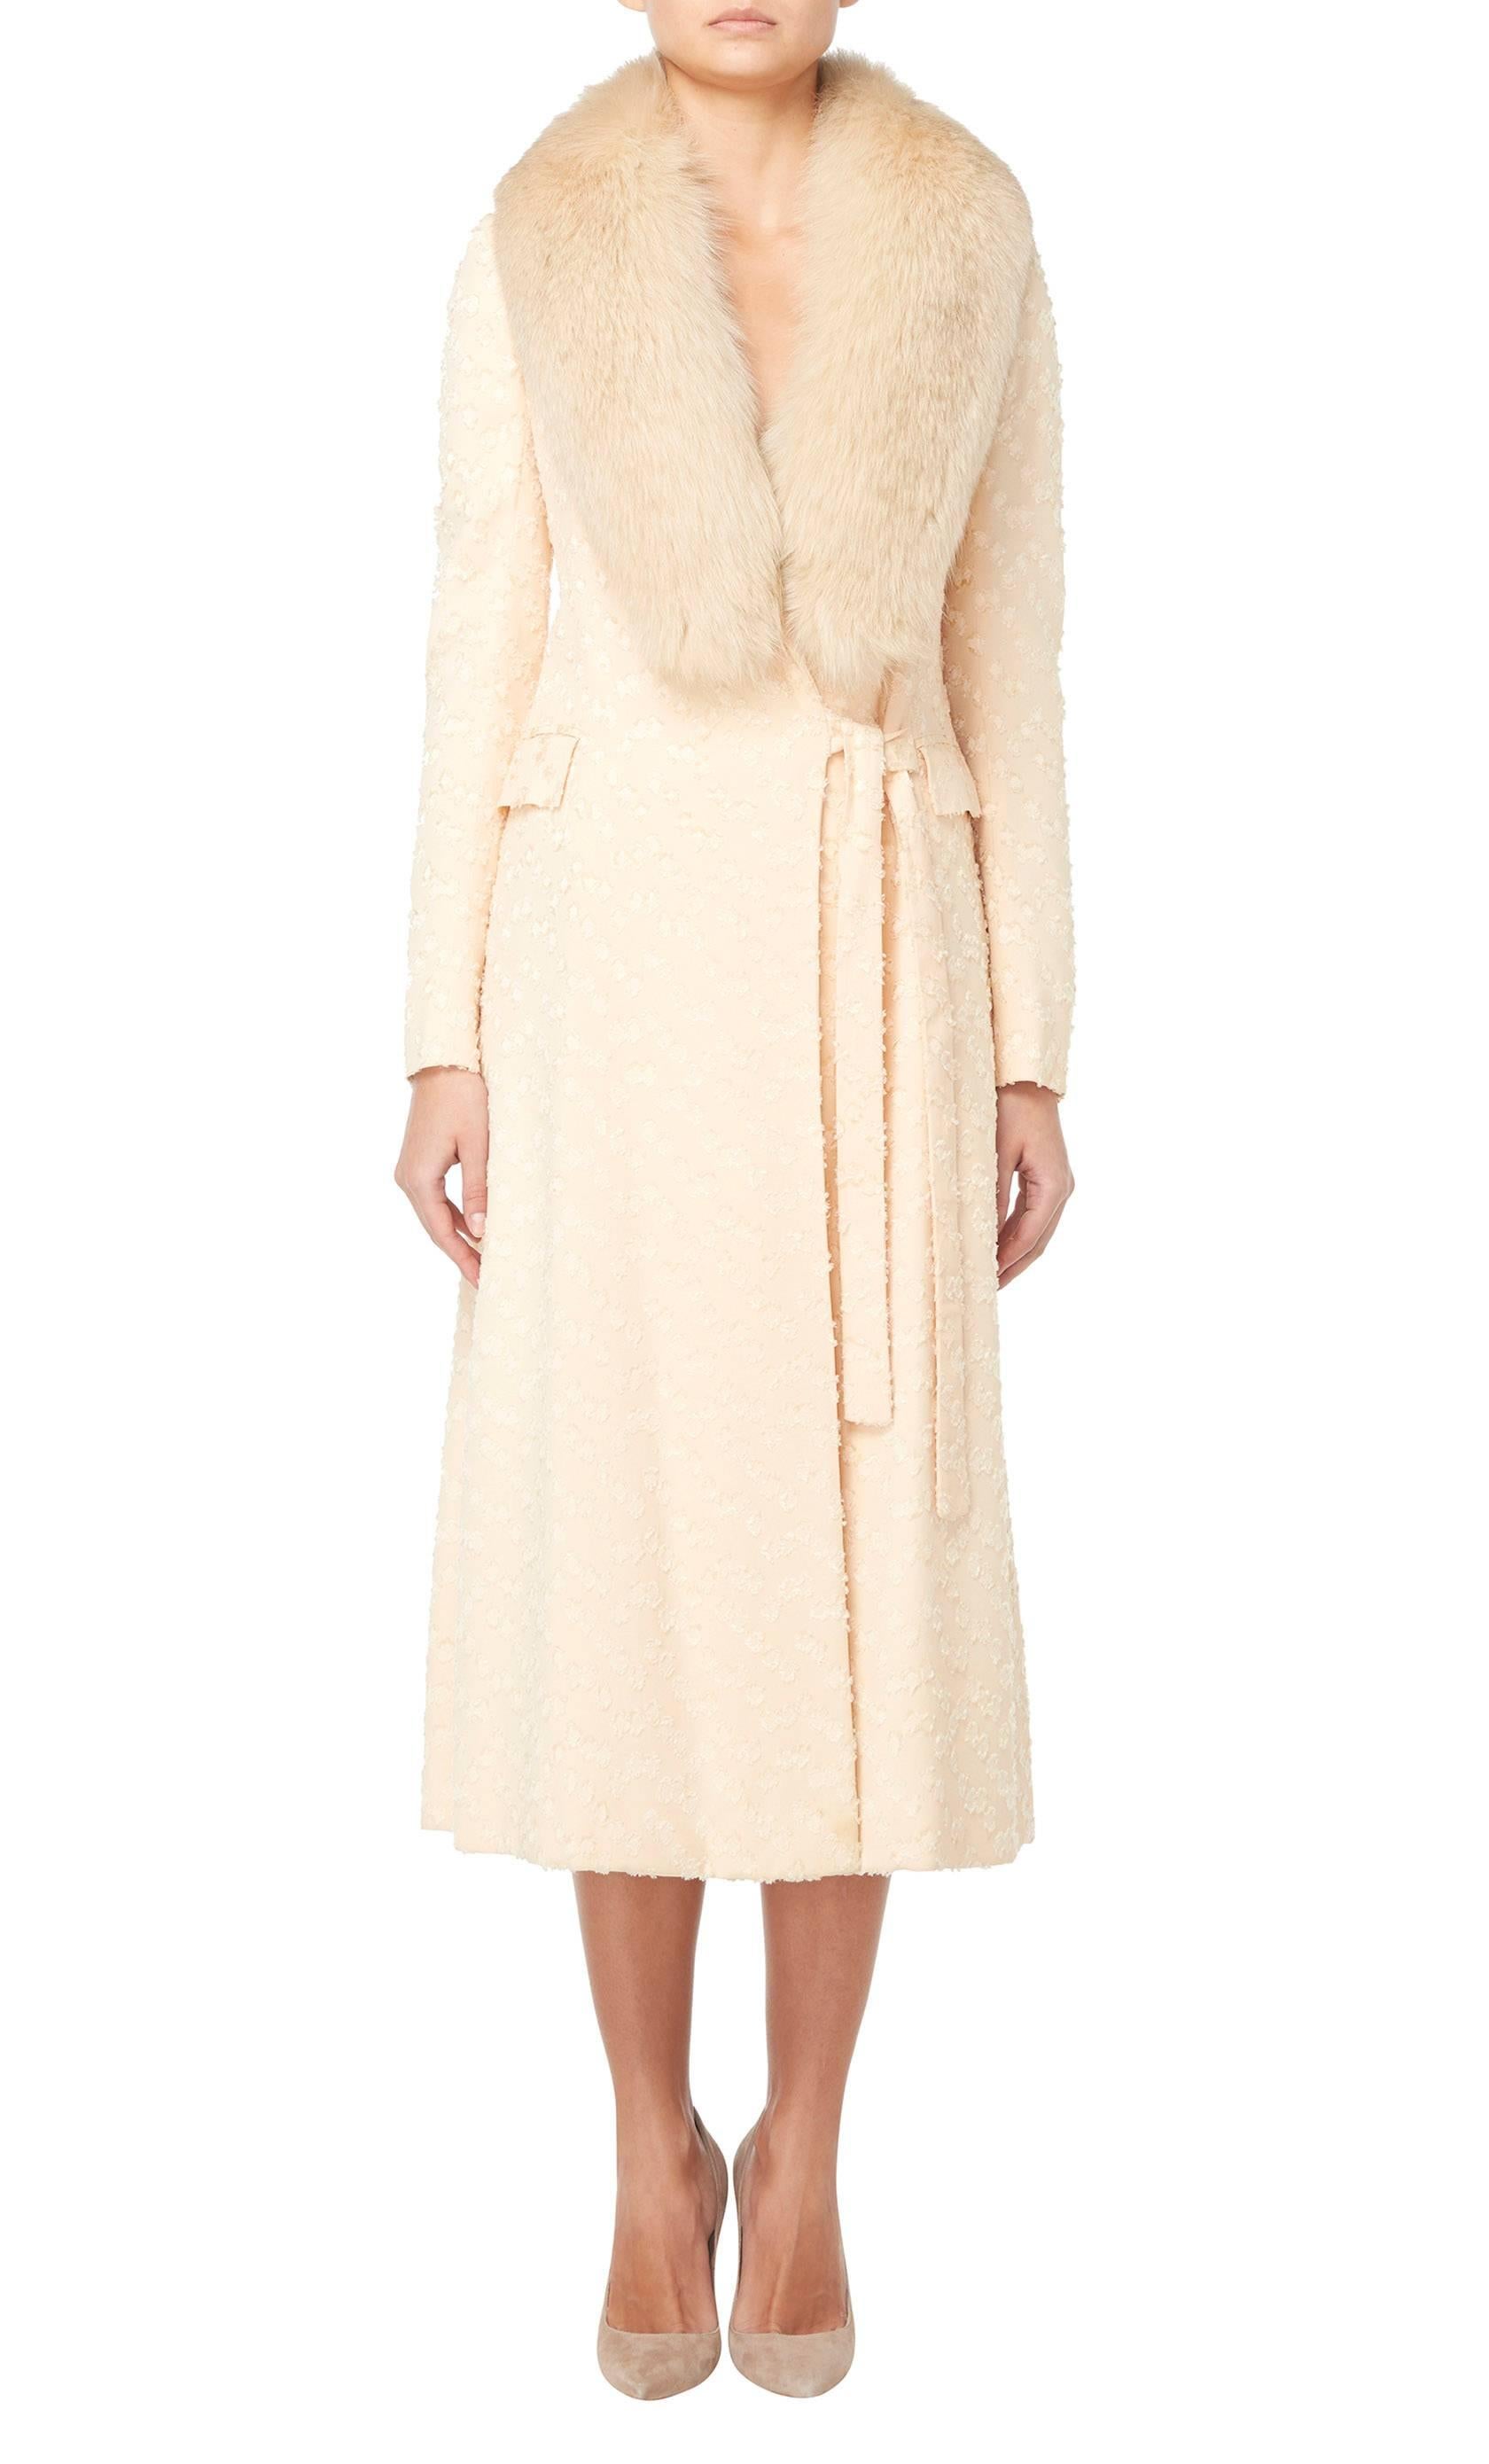 Constructed in apricot clip dot silk, this Adolfo coat features an ivory fox fur collar. With a wrap over style, the coat ties on the waist, adding definition to the silhouette and features pockets on the hip.

Constructed in pale orange clip dot